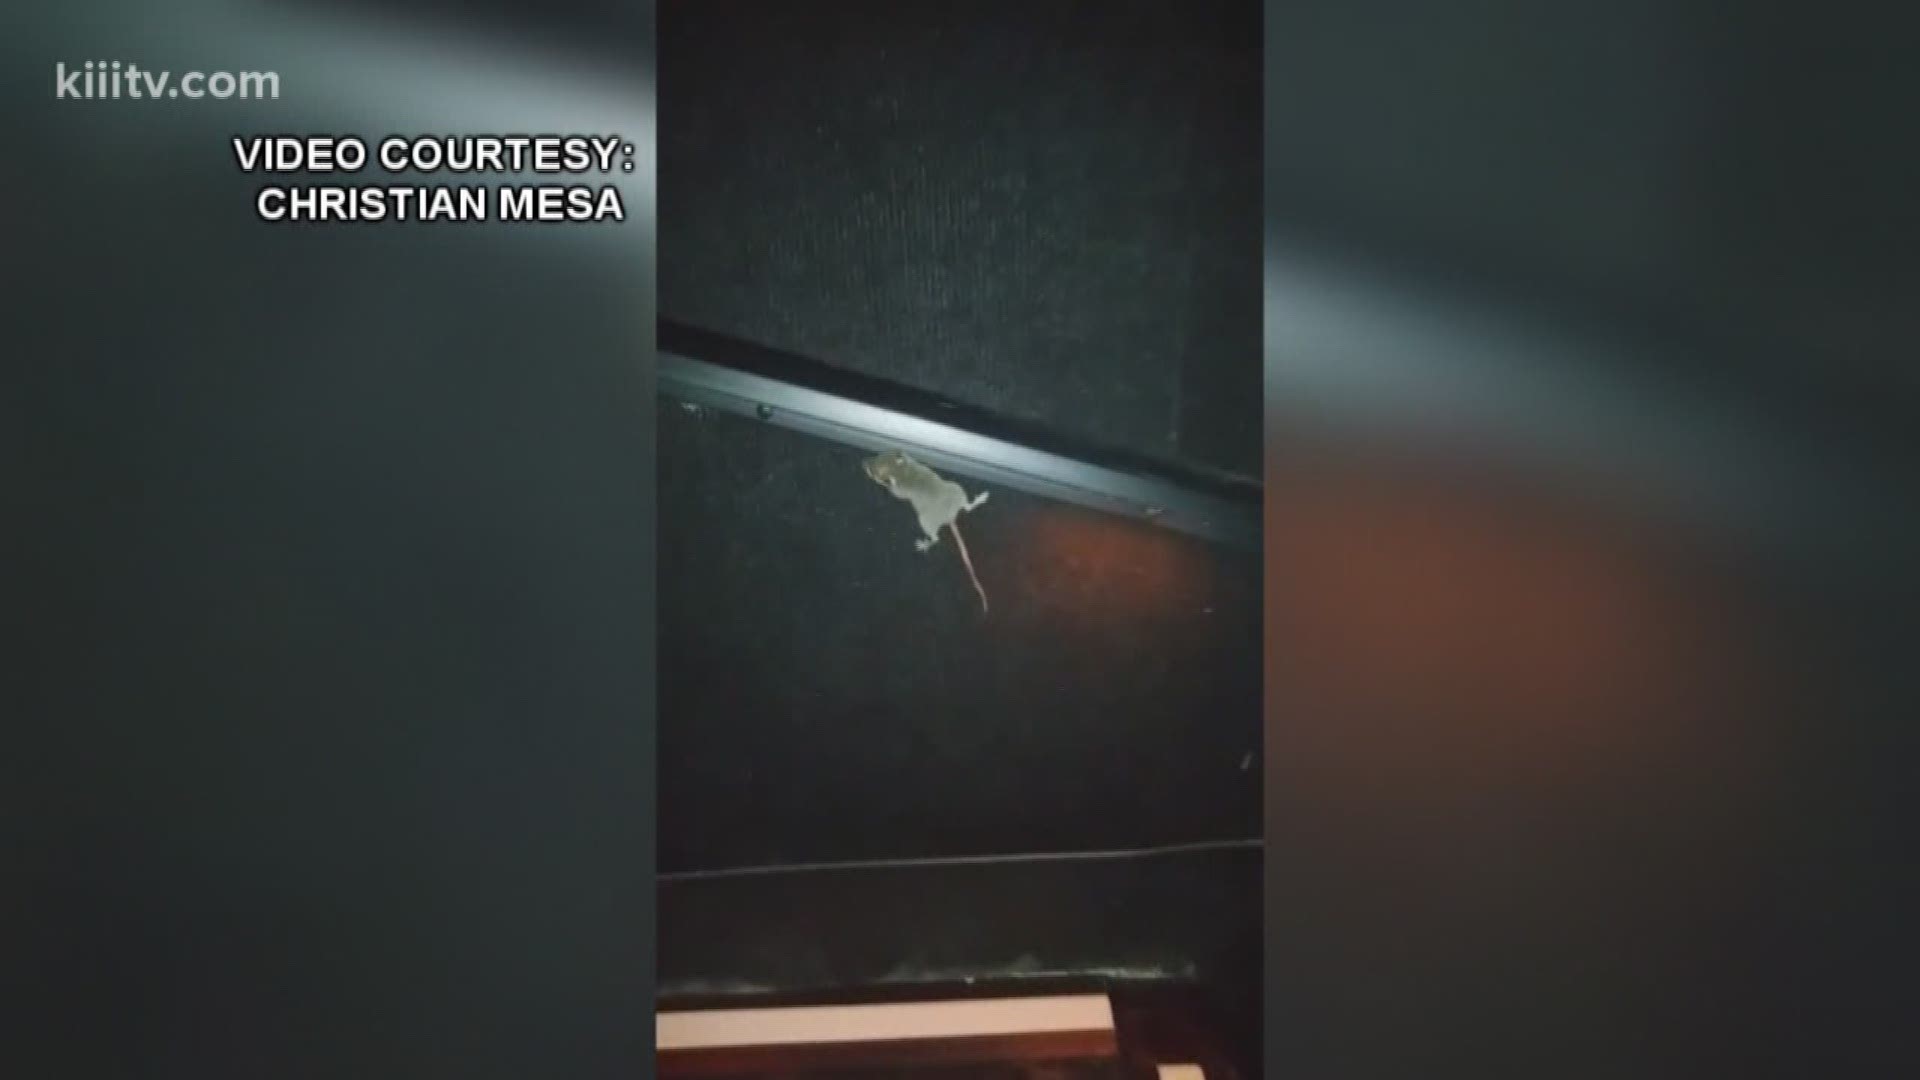 The Corpus Christi-Nueces County Public Health Department confirmed Monday that they are investigating claims that a mouse was spotted inside the AMC Theater.